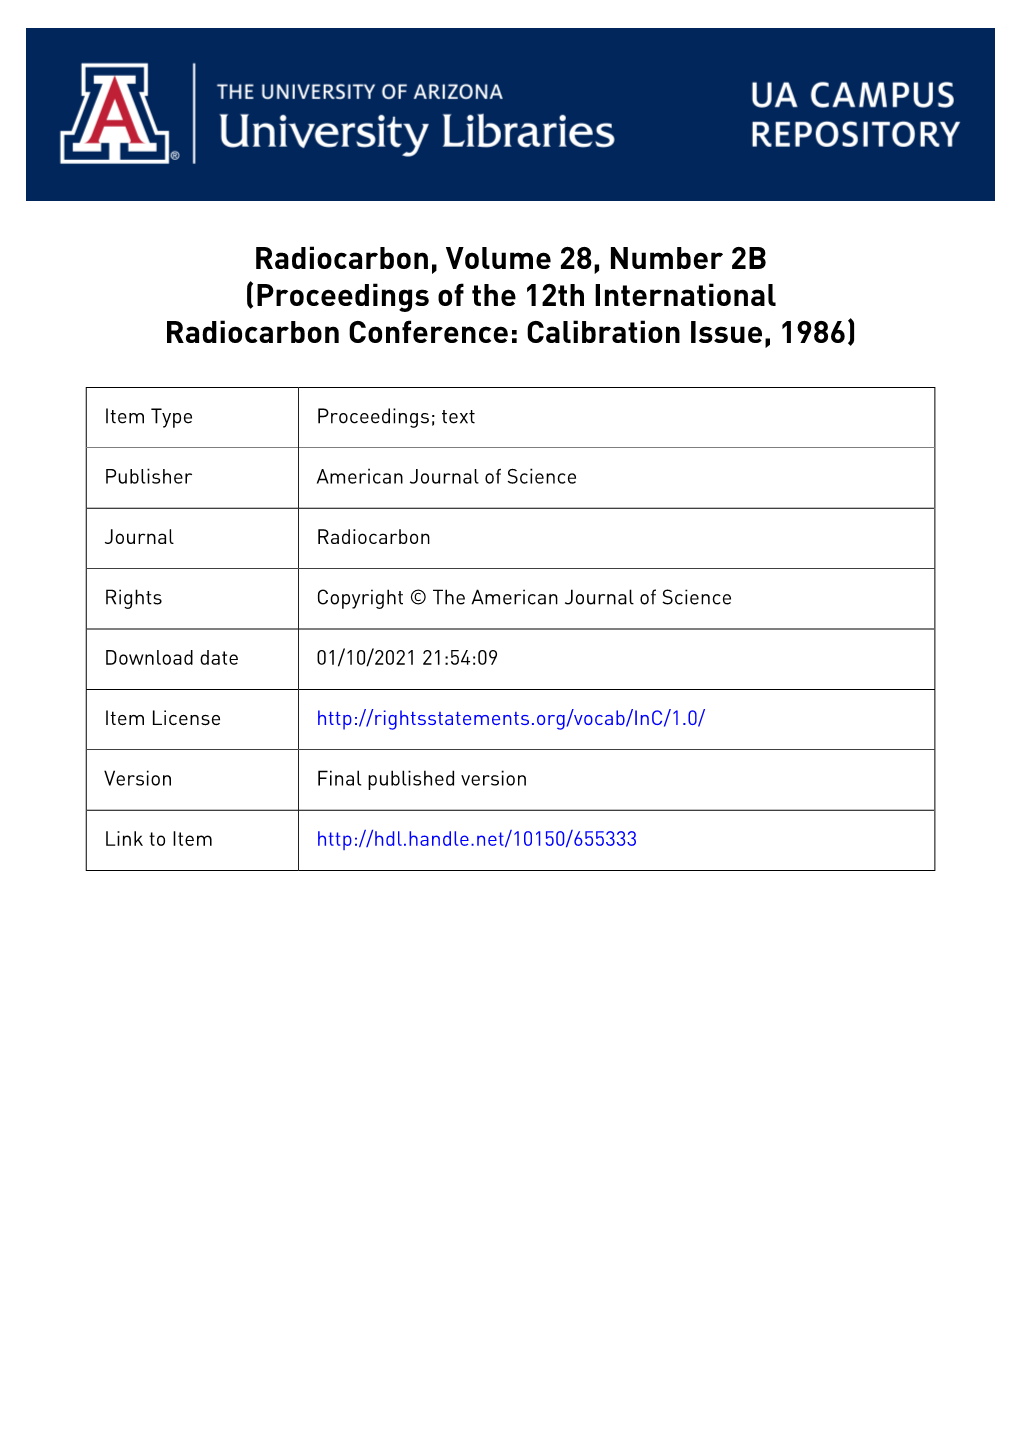 H Adiocarben Published by the AMERICAN JOURNAL of SCIENCE